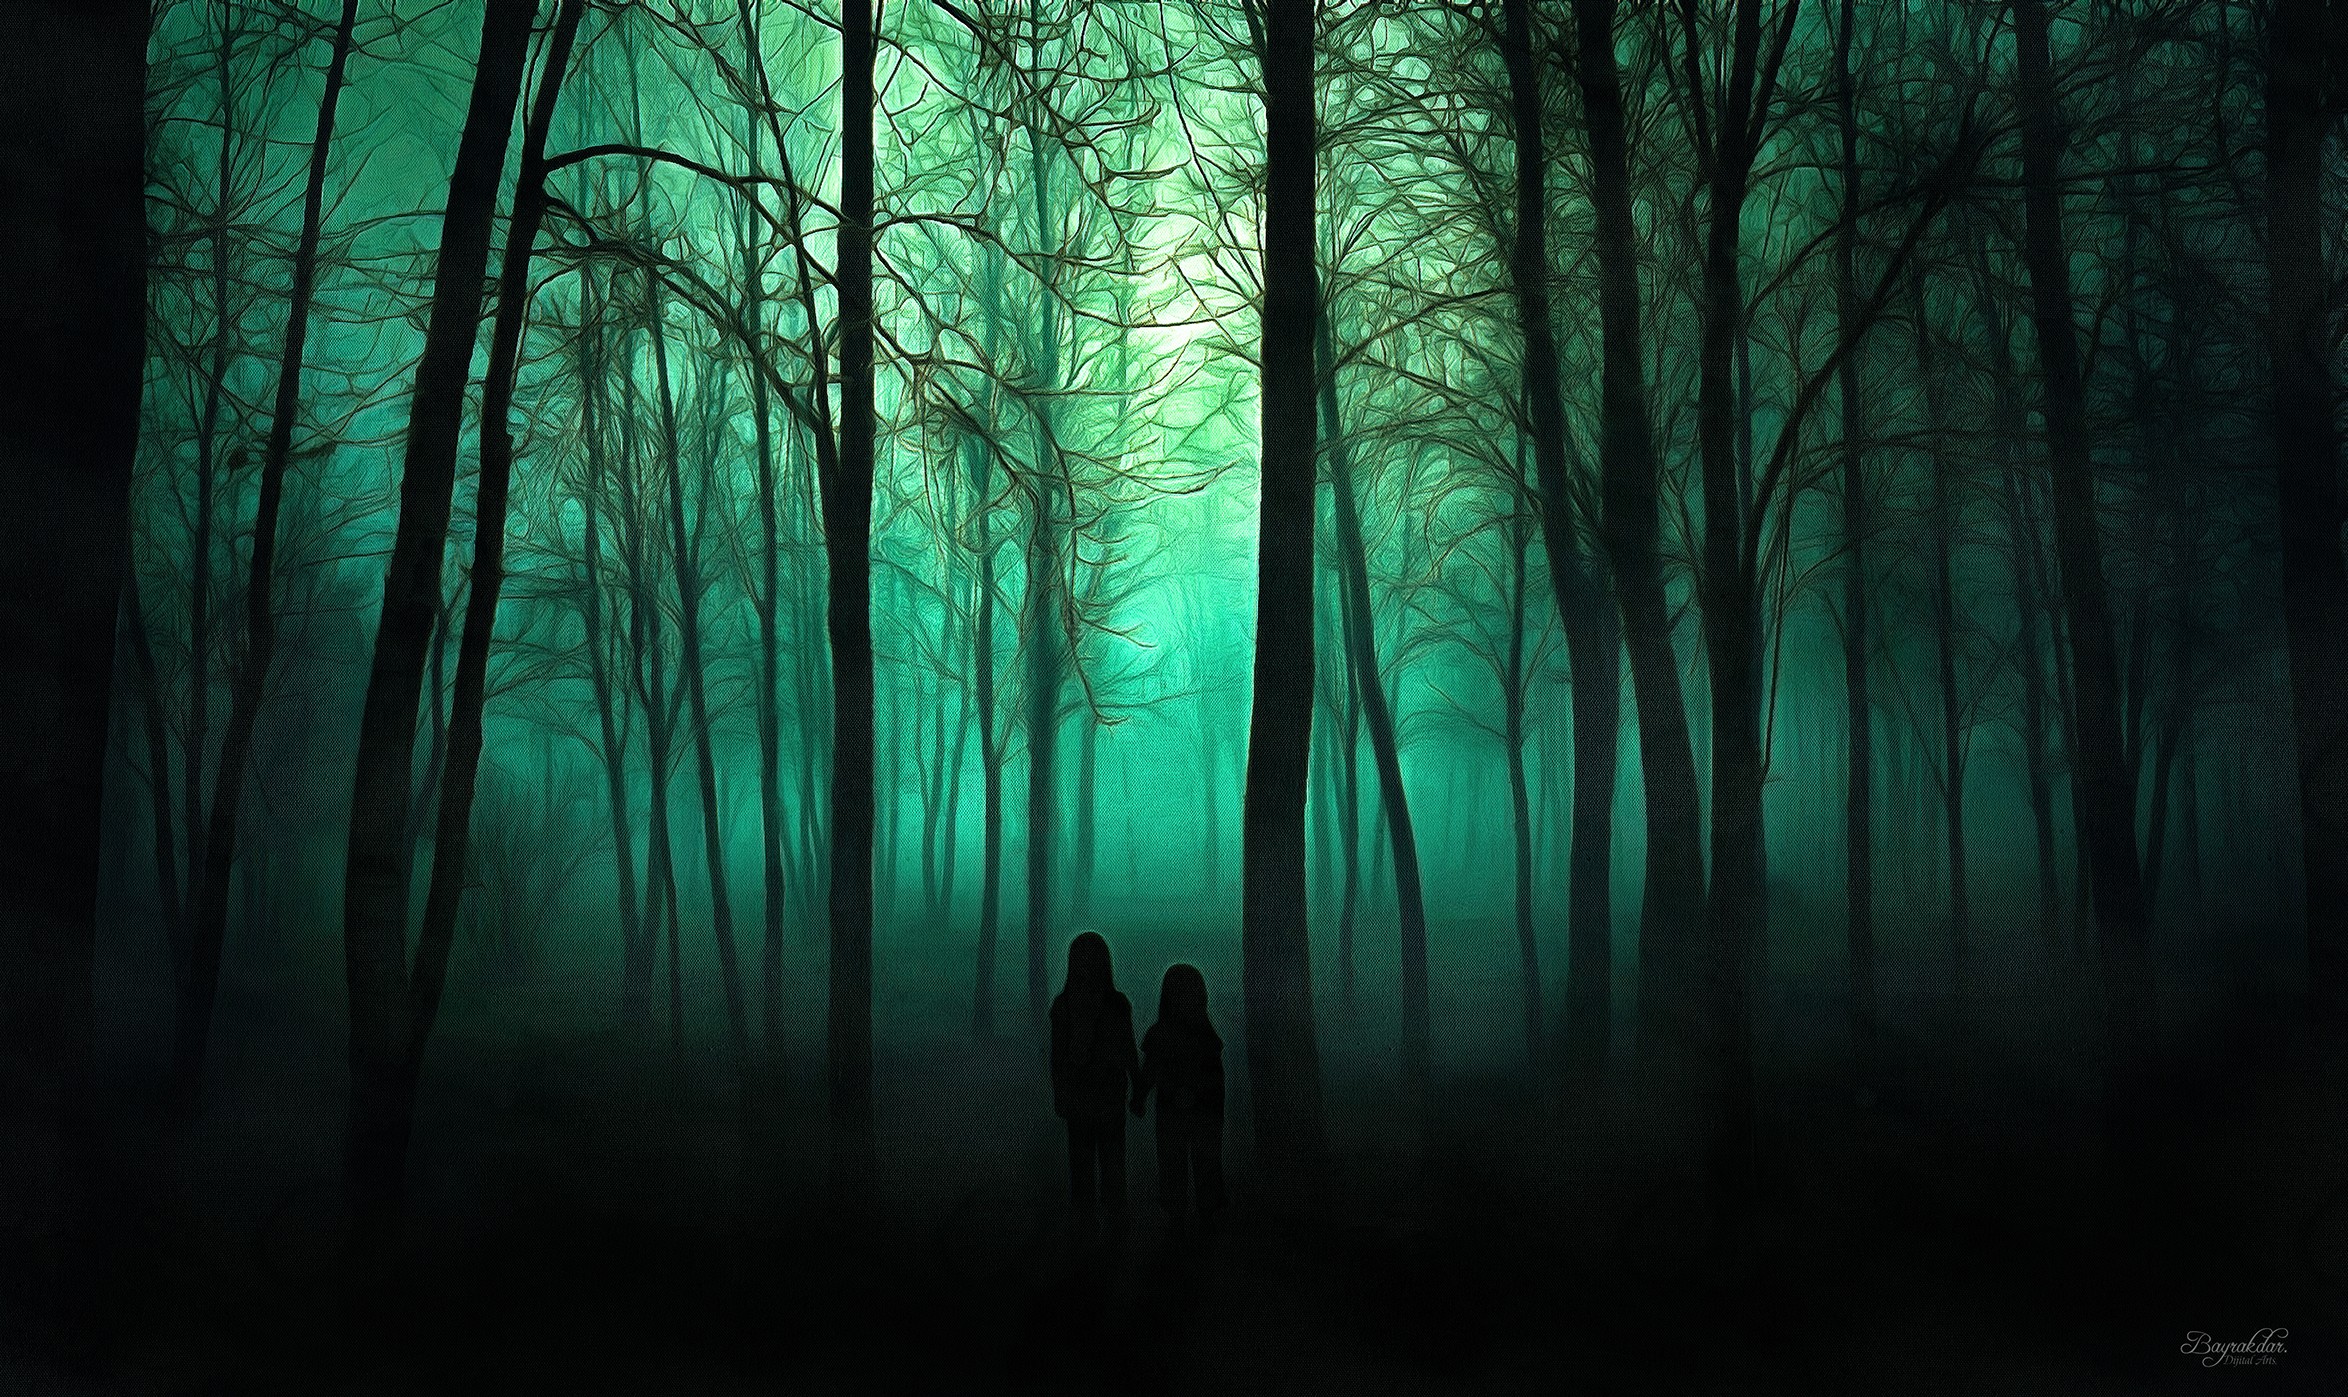 General 2348x1397 trees spooky dark artwork green nature outdoors low light watermarked